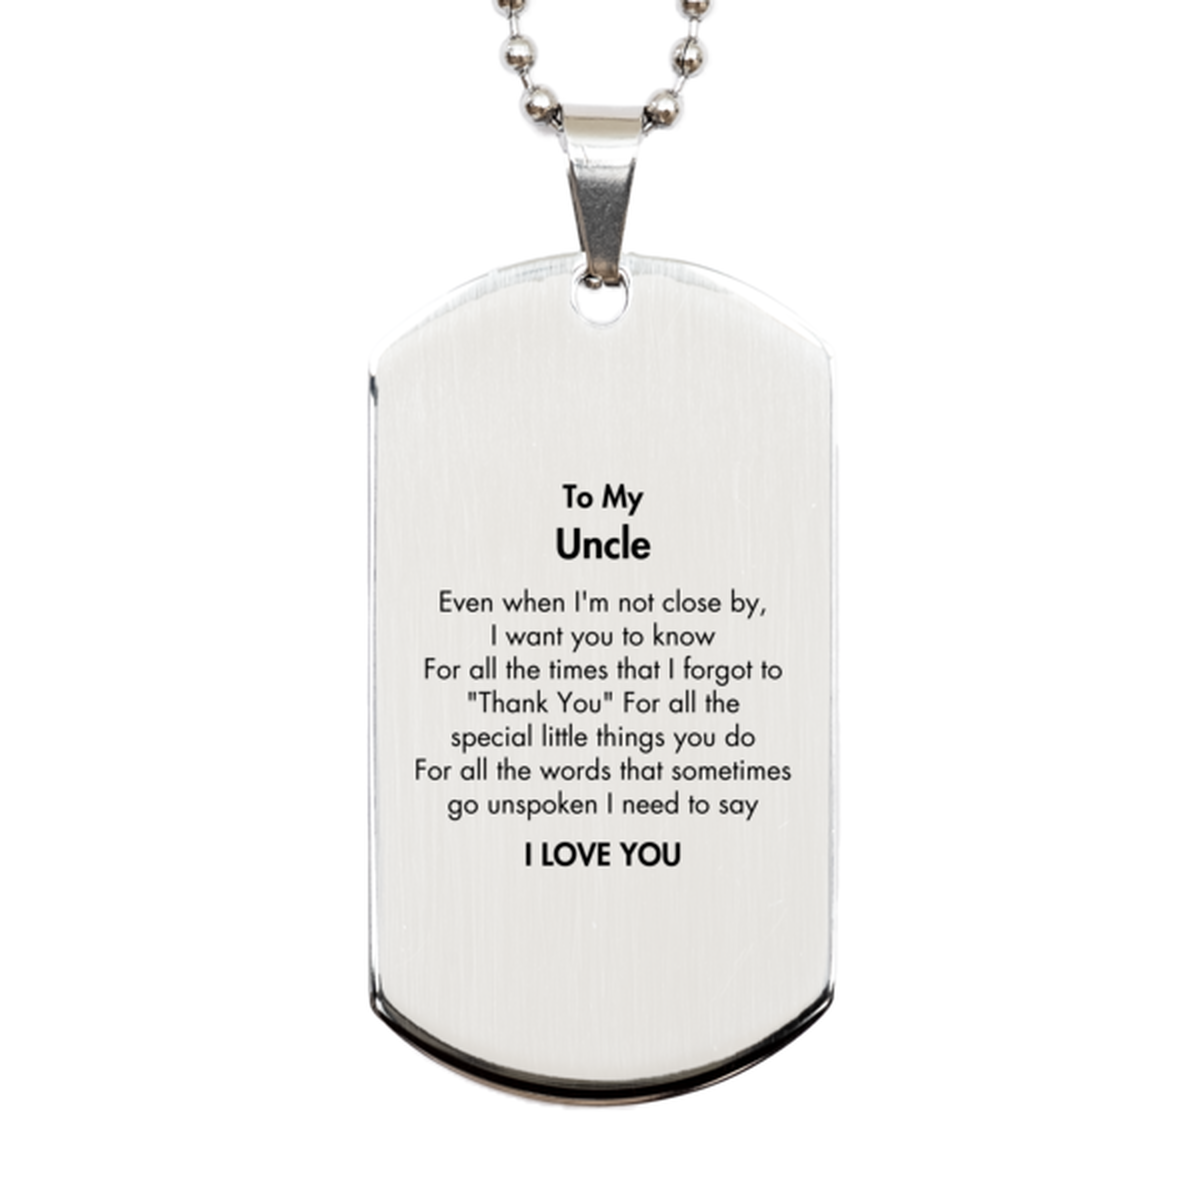 Thank You Gifts for Uncle, Keepsake Silver Dog Tag Gifts for Uncle Birthday Mother's day Father's Day Uncle For all the words That sometimes go unspoken I need to say I LOVE YOU